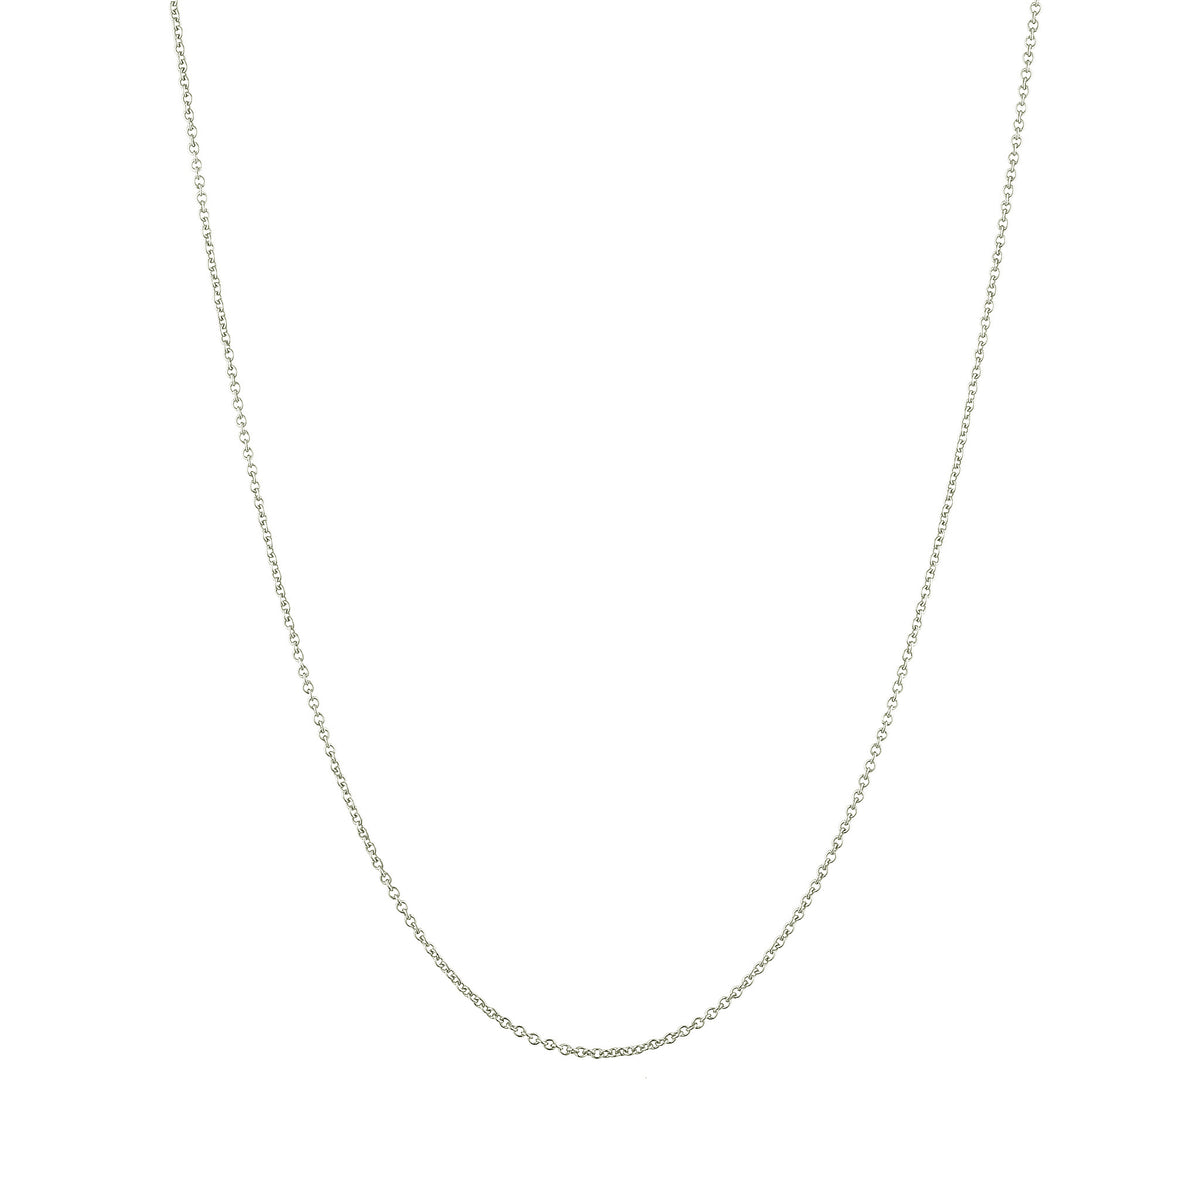 50cm Cable Chain - Sterling Silver